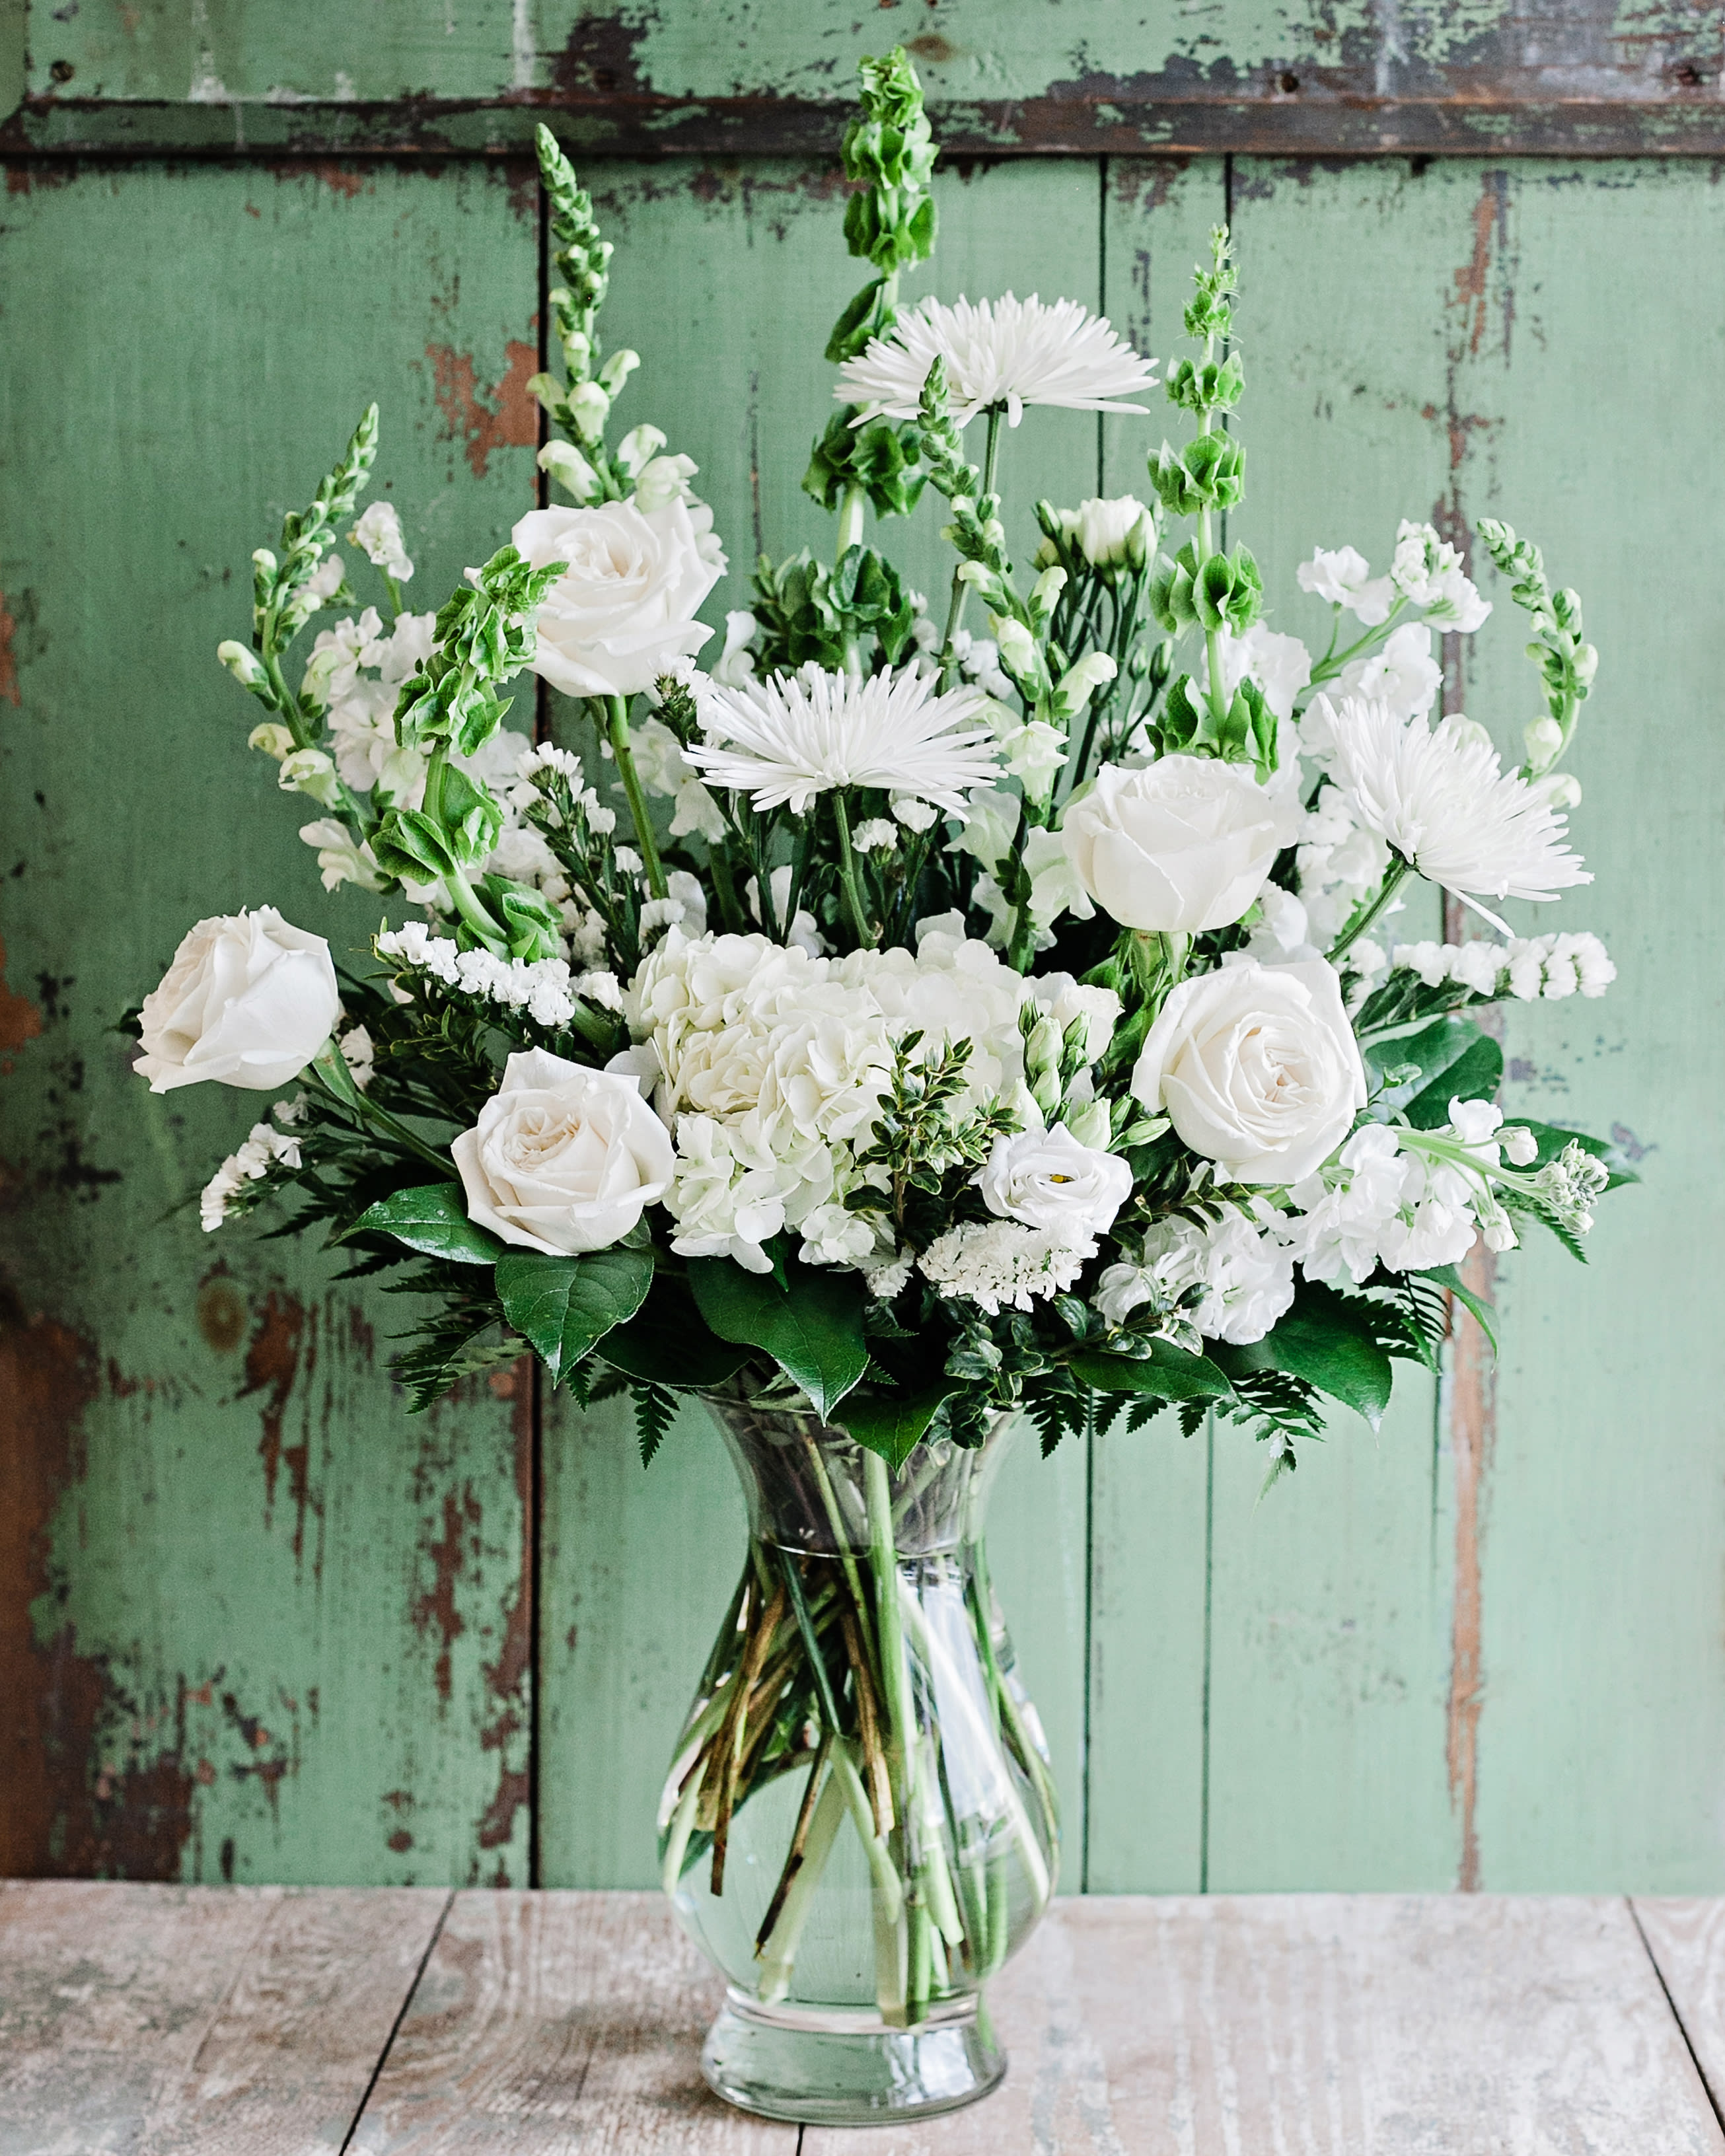 Blanche - A tall vase arrangement full of fresh white flowers such as roses, hydrangea, lisianthus, cremones, snapdragons and stock with accents of green. The orientation of this arrangement is one sided. Approximately 30&quot; tall x 20&quot; wide